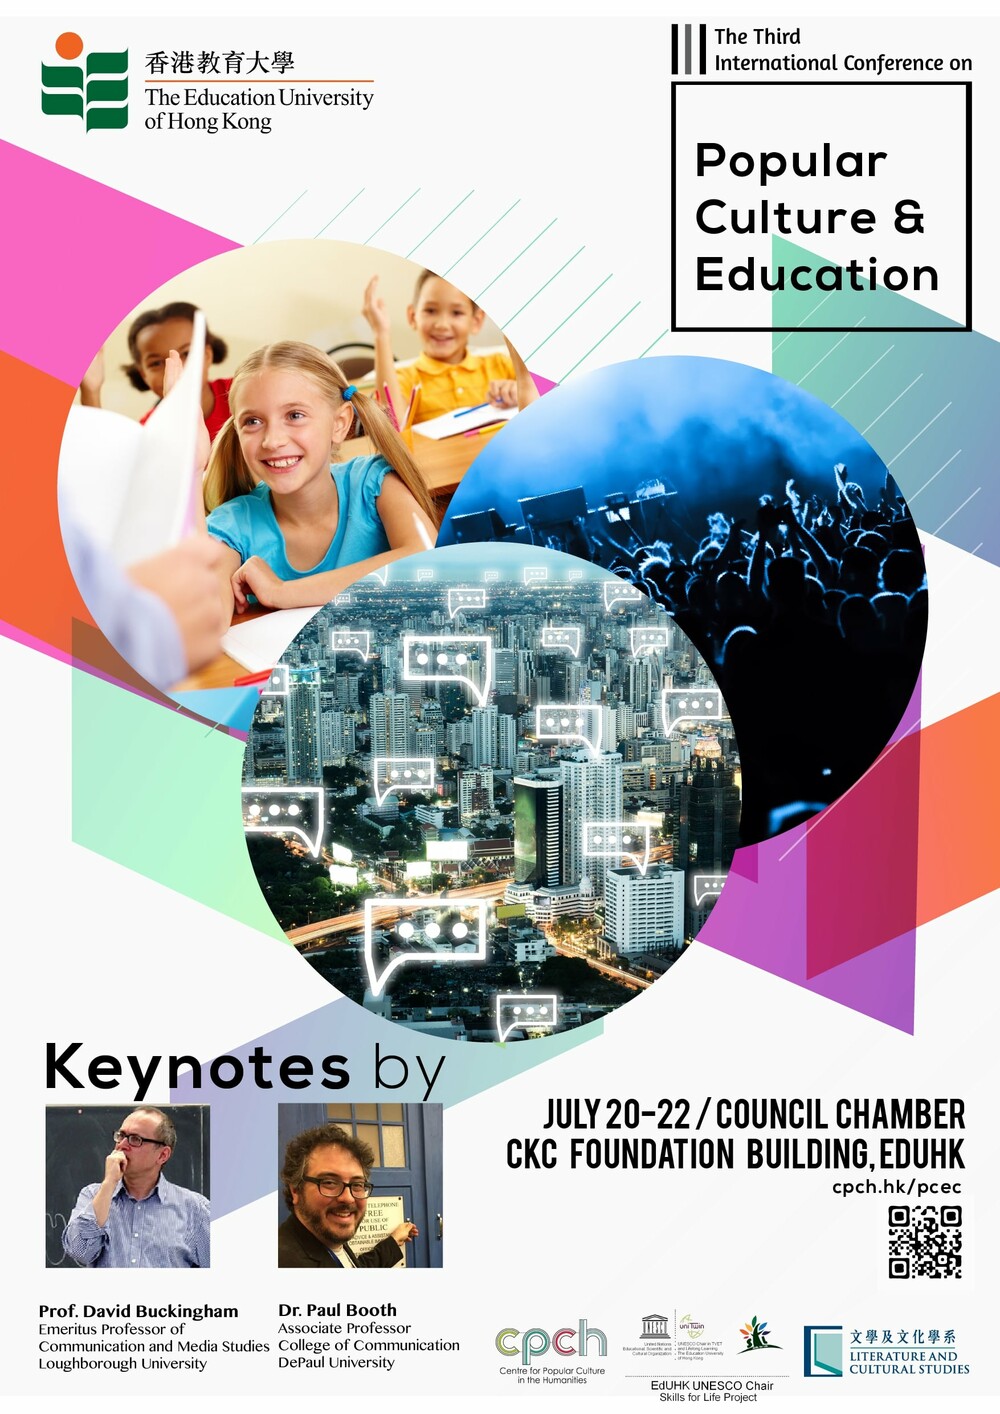 The Third International Conference on Popular Culture and Education